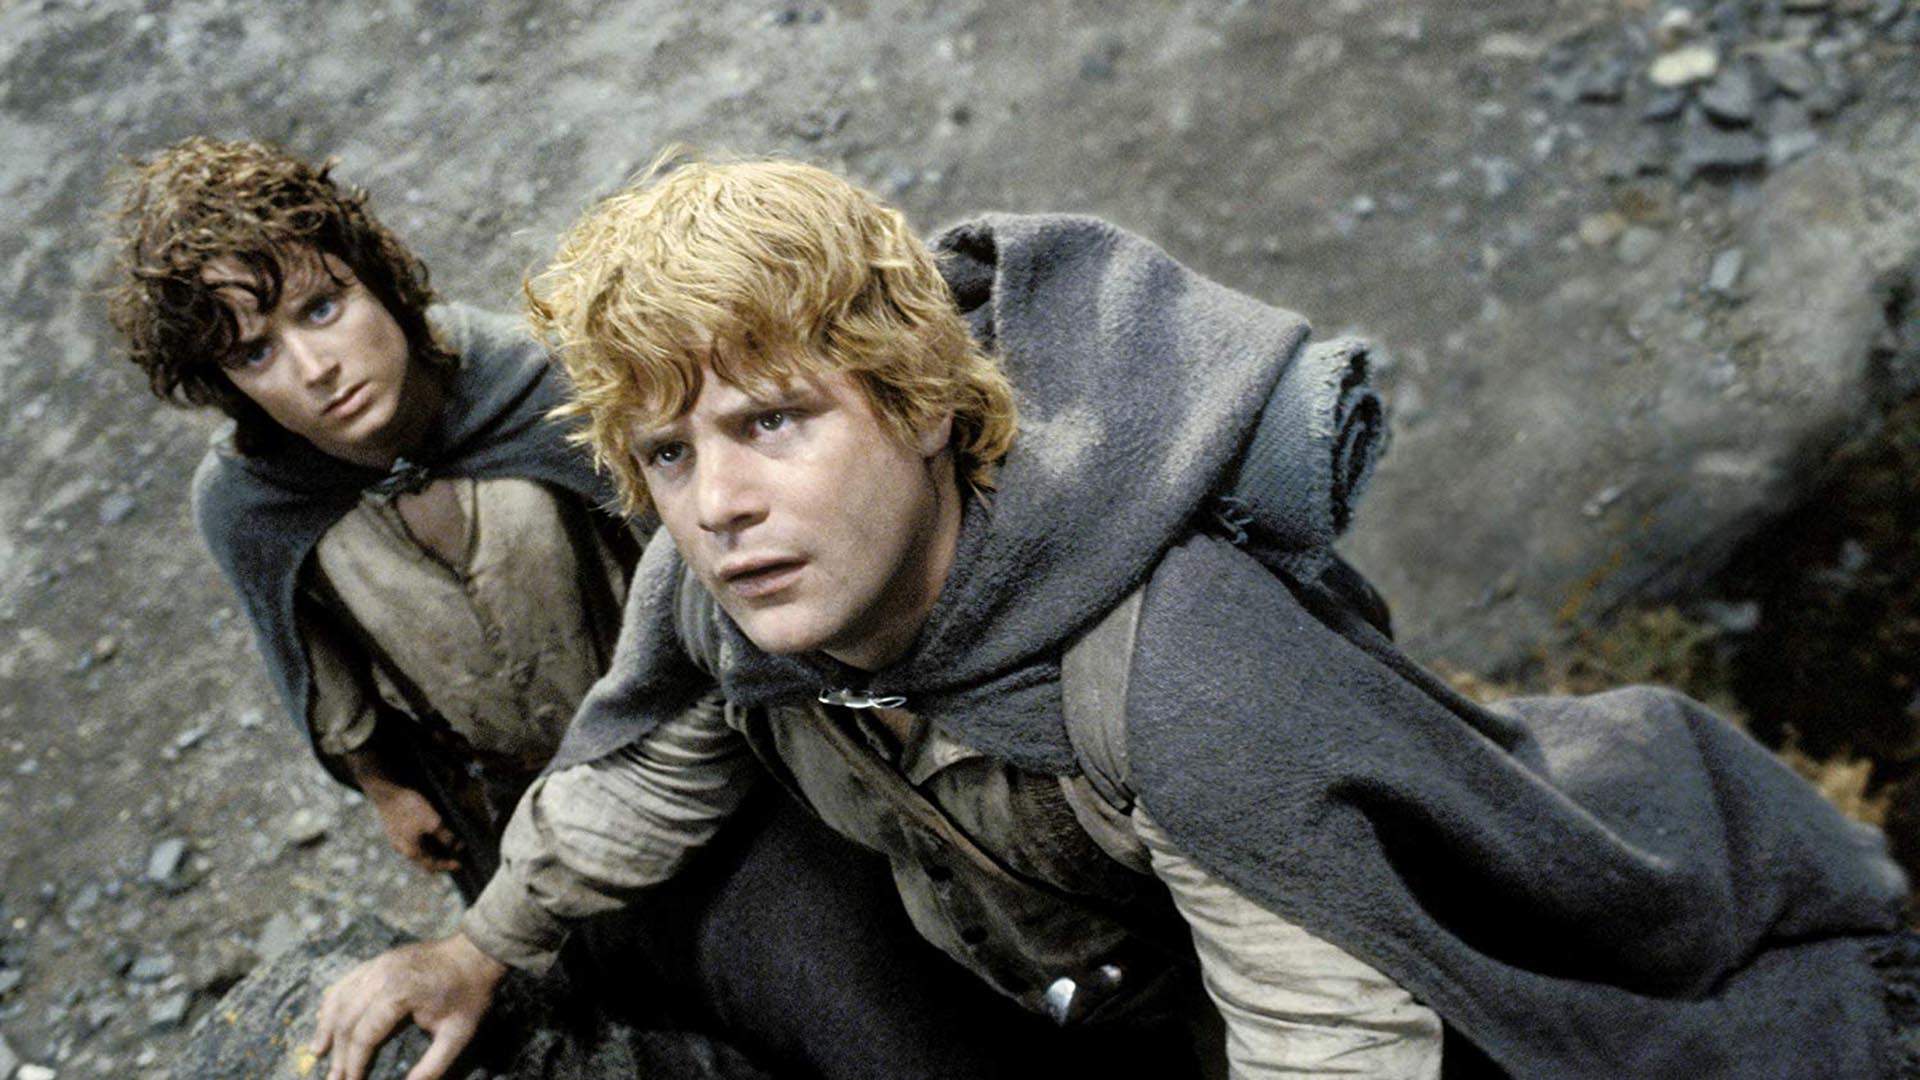 'The Lord of the Rings' Franchise Is Returning to the Big Screen with a Brand-New Series of Movies